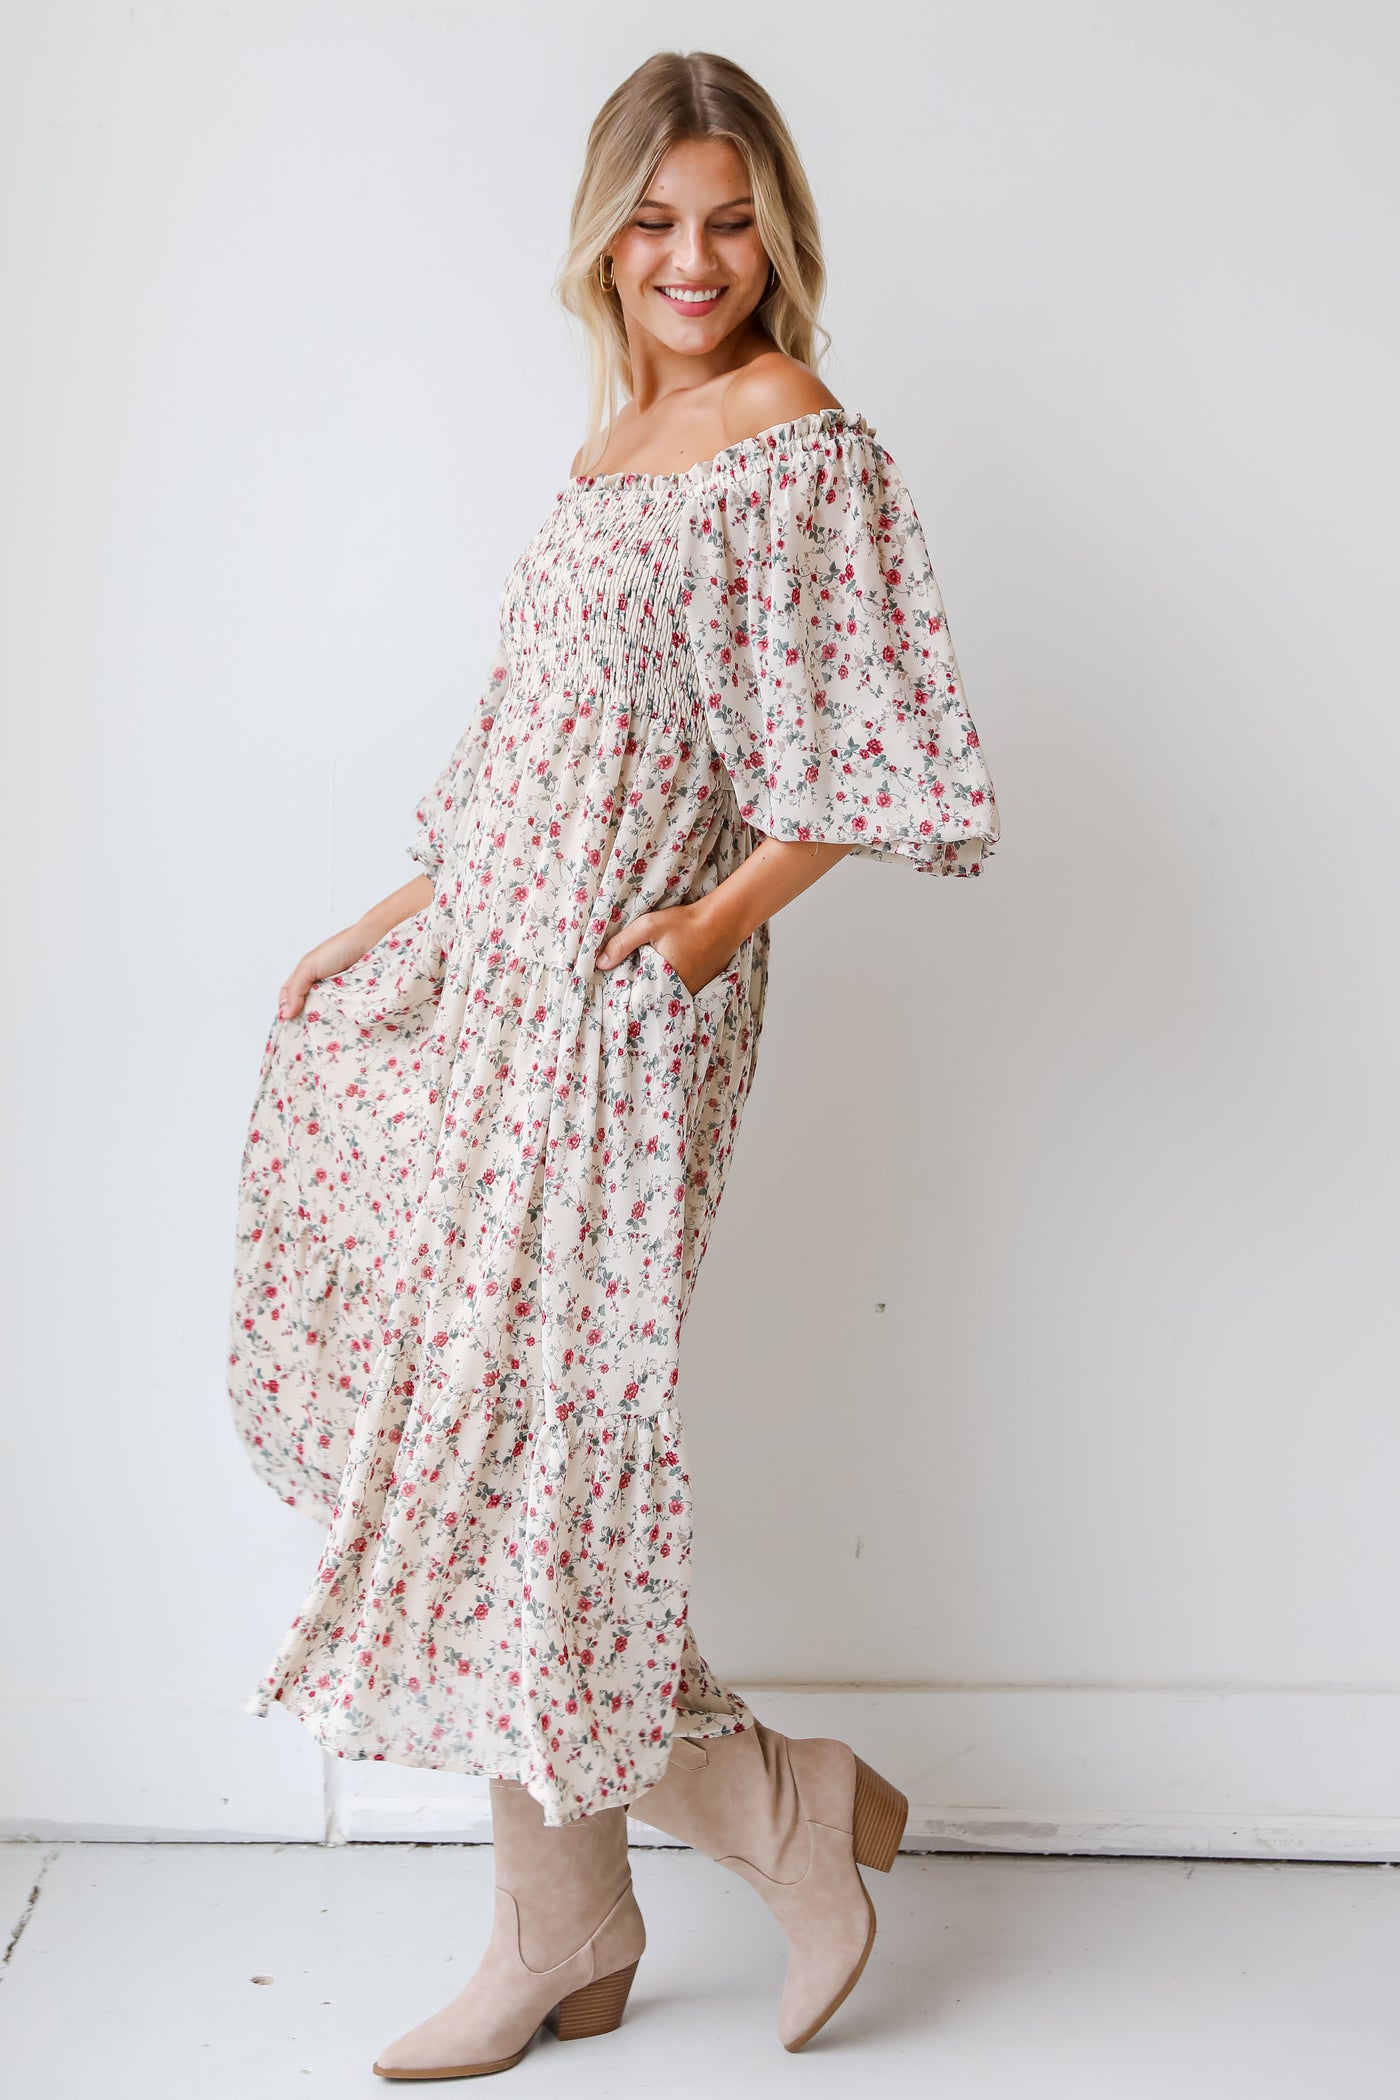 white floral maxi dress side view